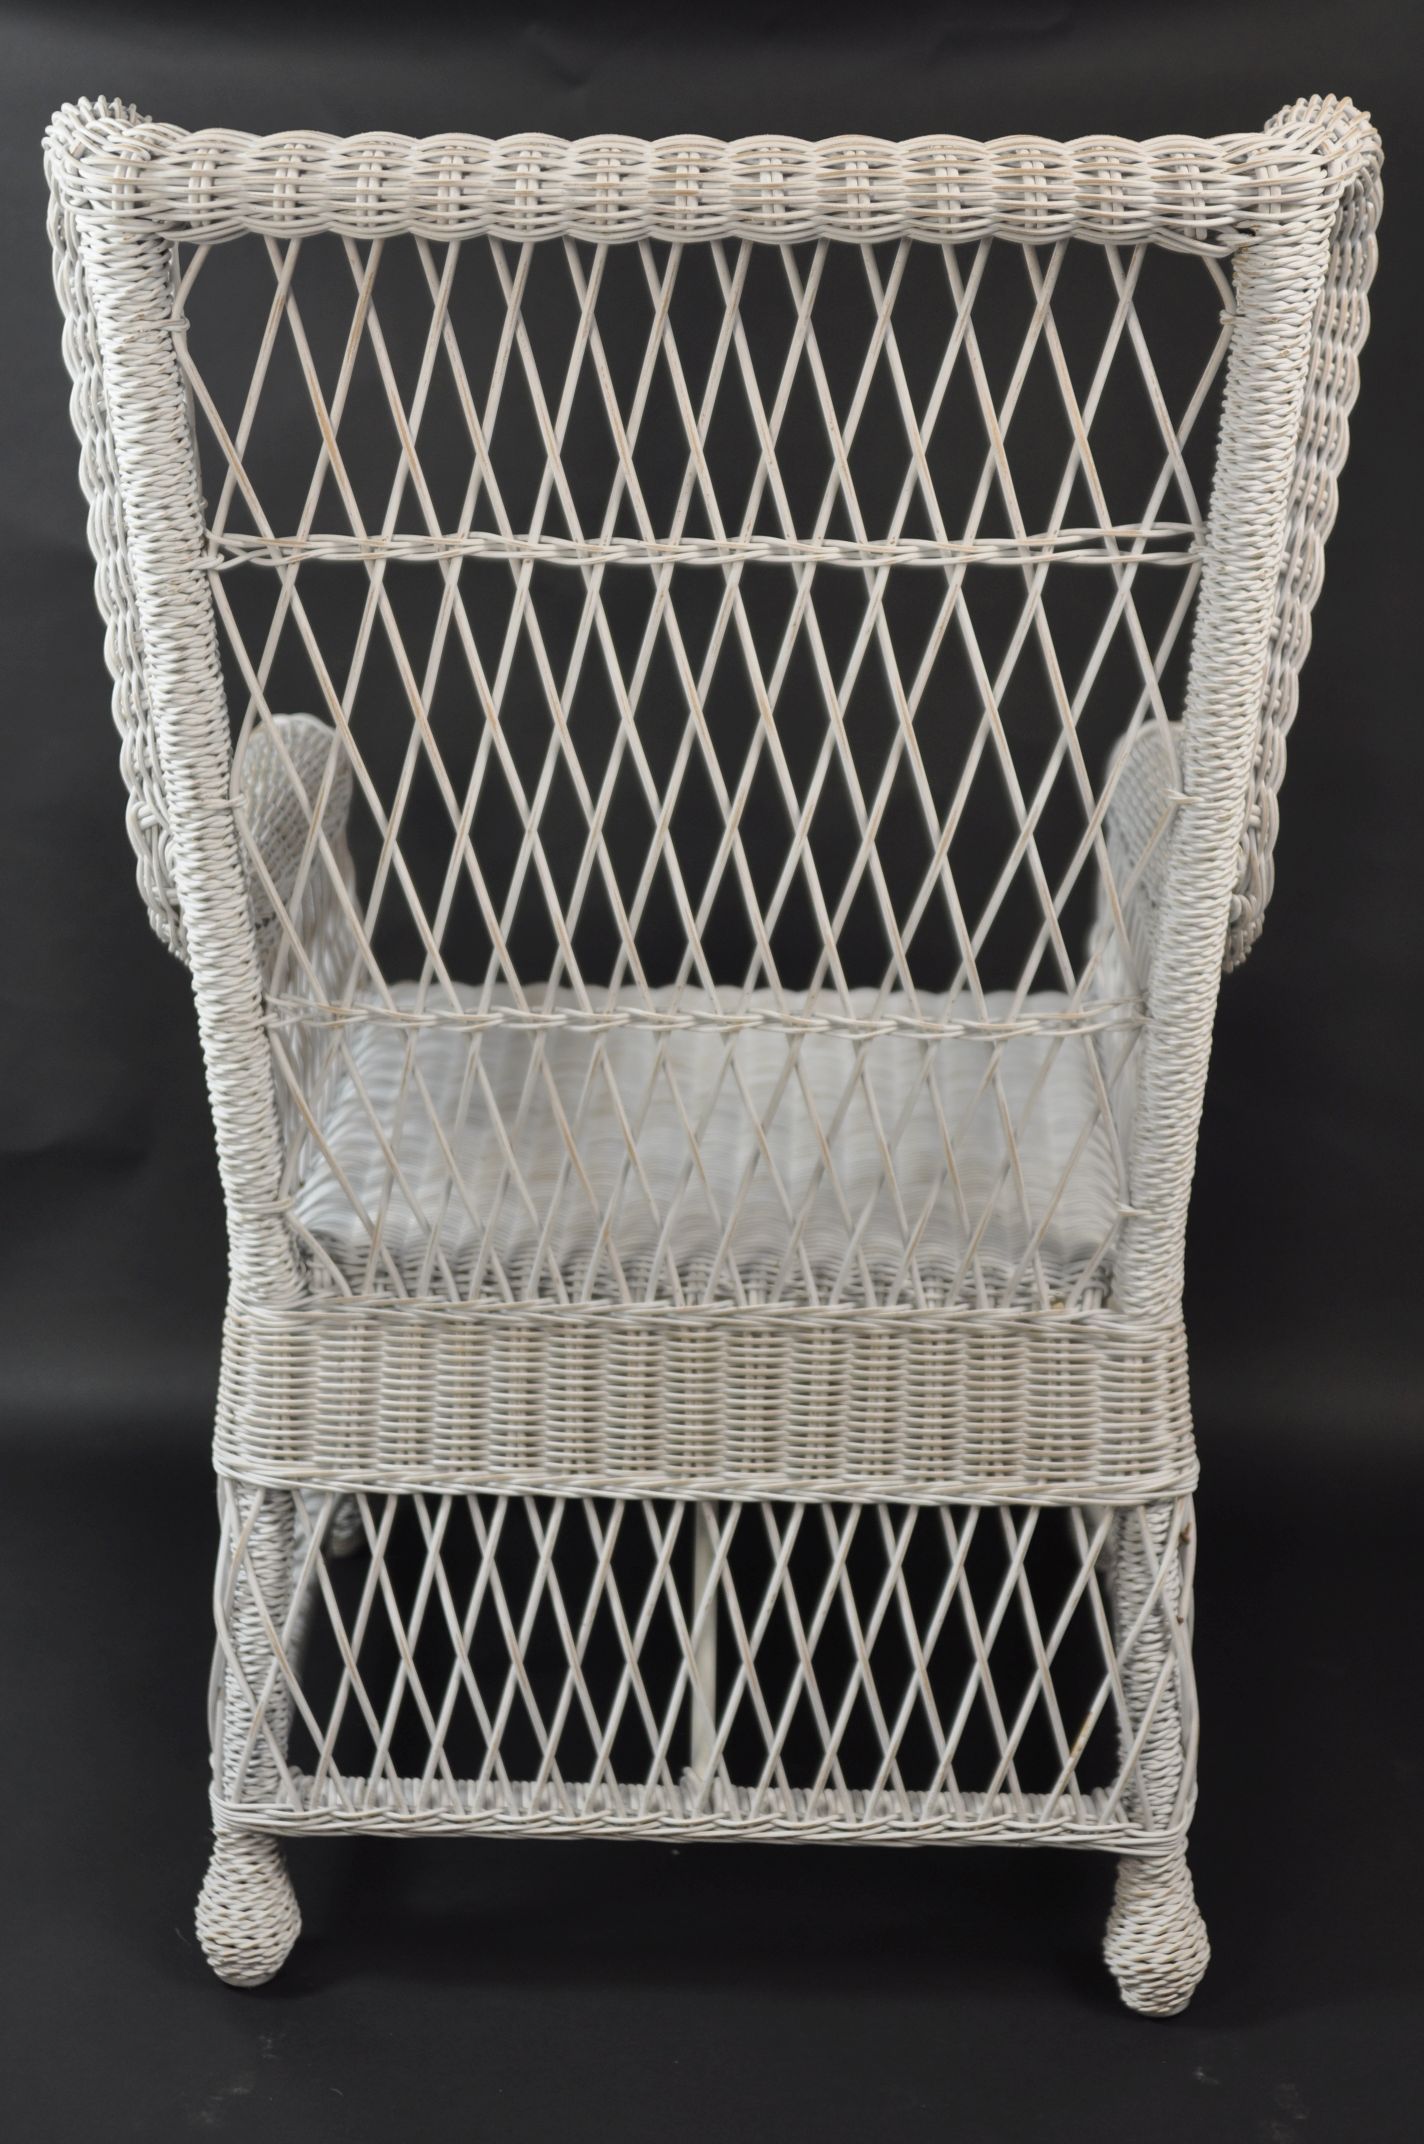 Capers White Rattan Outdoor Arm Chair – Mecox Gardens Throughout White Fabric Outdoor Wicker Armchairs (View 6 of 15)